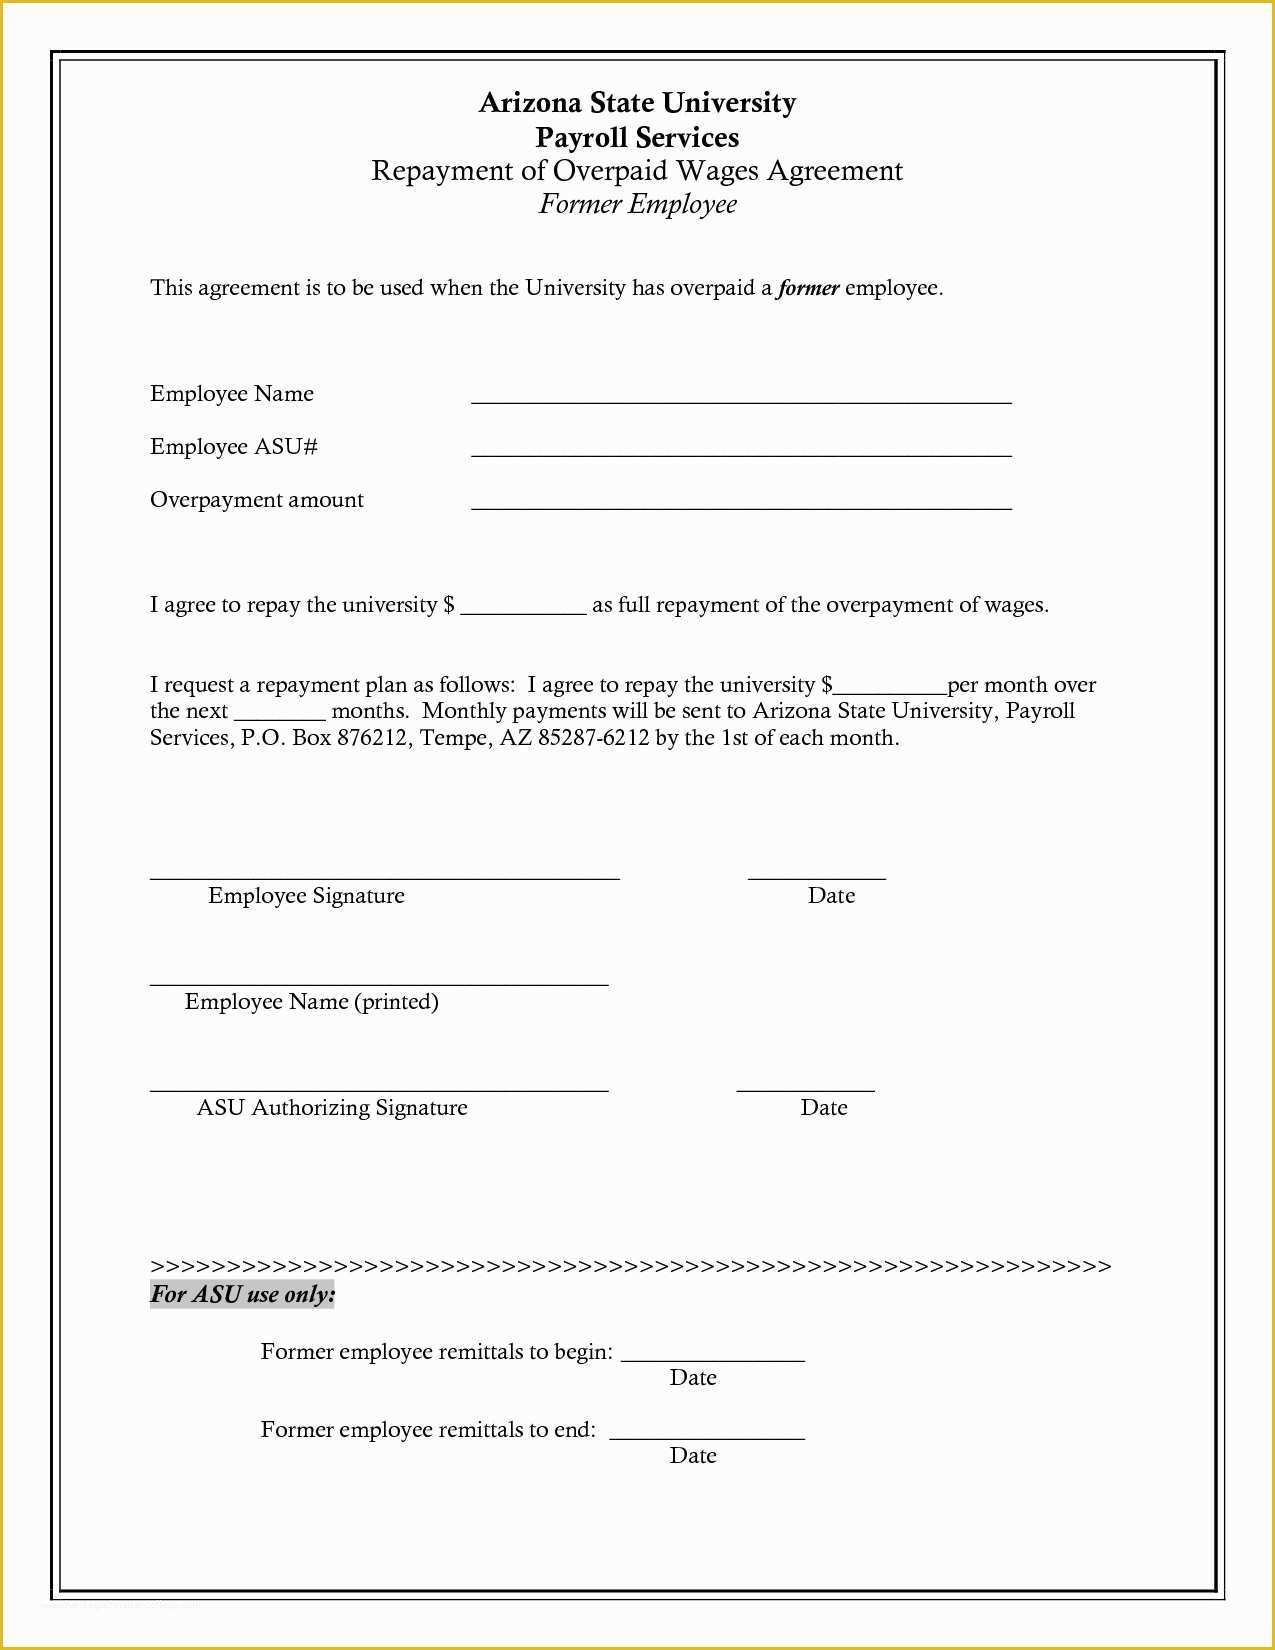 Loan Repayment Agreement Template Free Of Employee Repayment Agreement Template Advanced Agreement